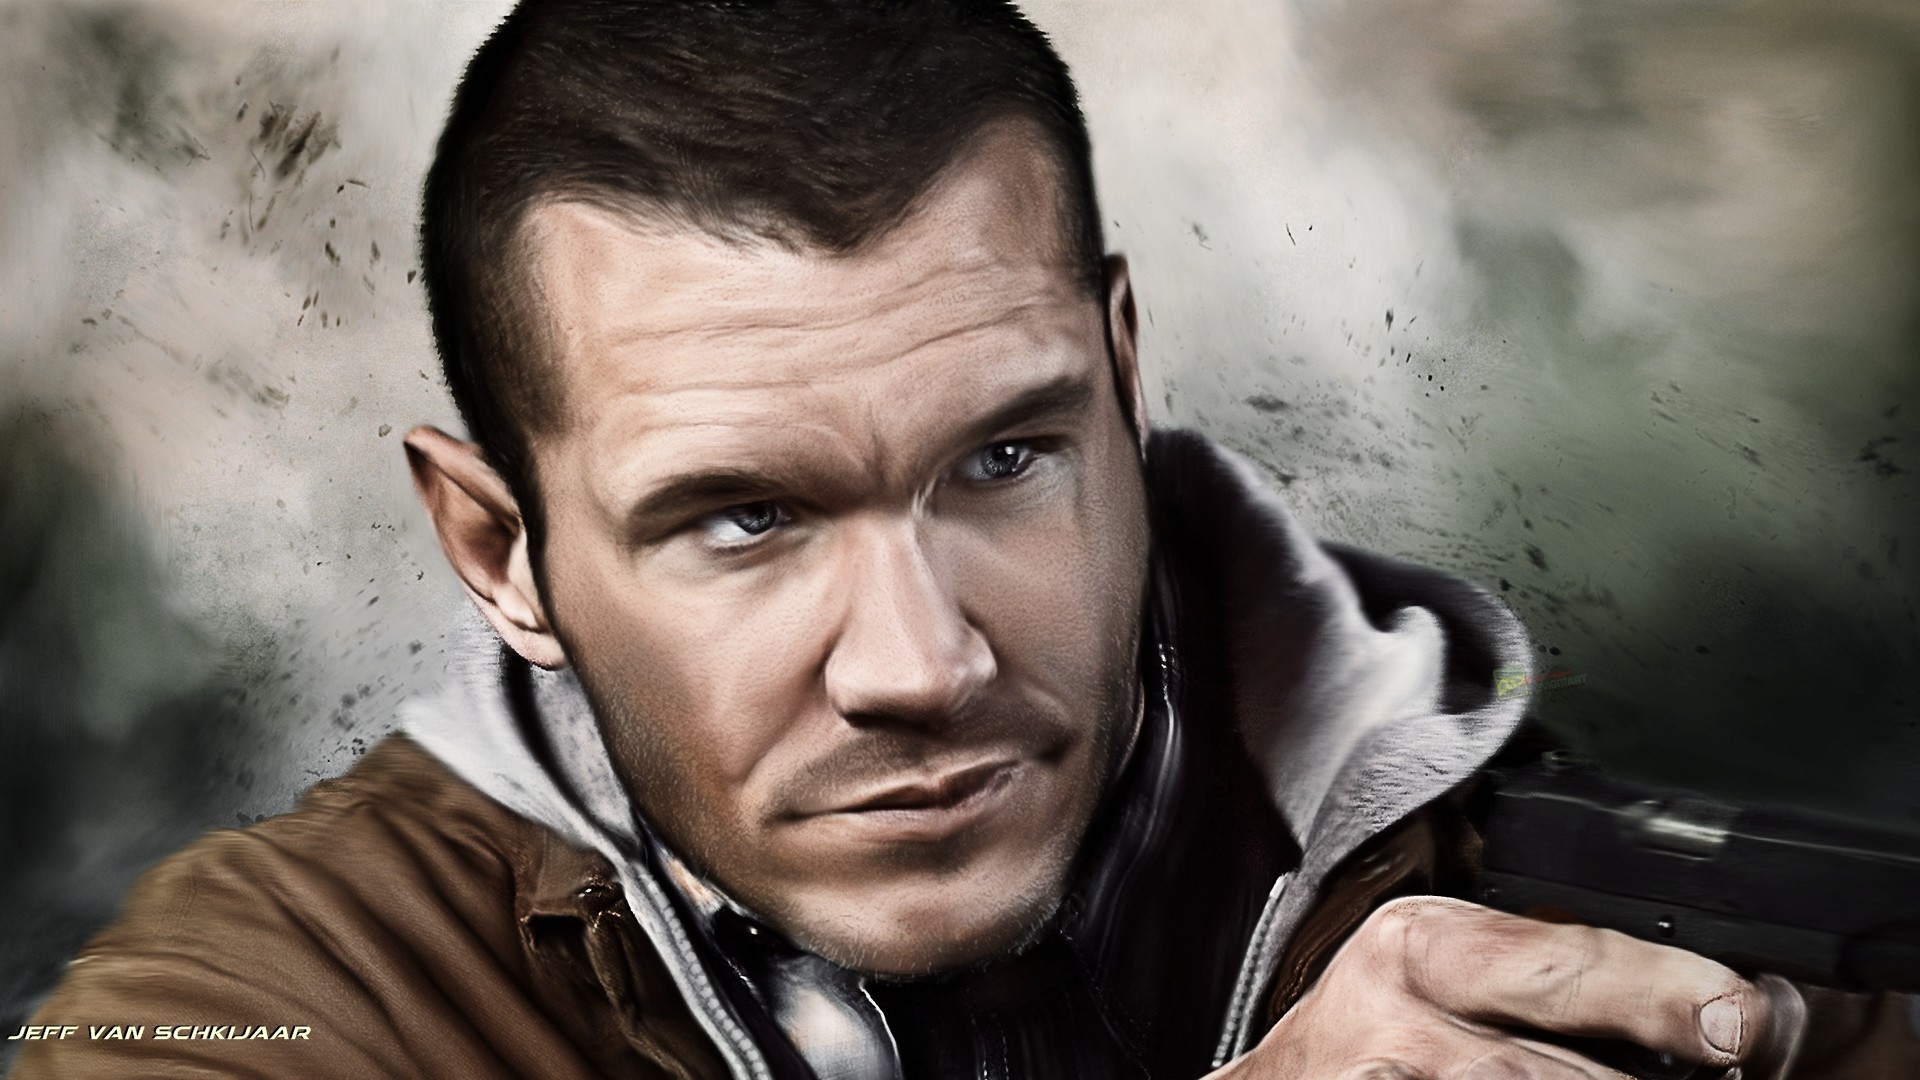 1920x1080 ... Randy Orton The Condemned 2 Movie Wallpaper by jeffery10